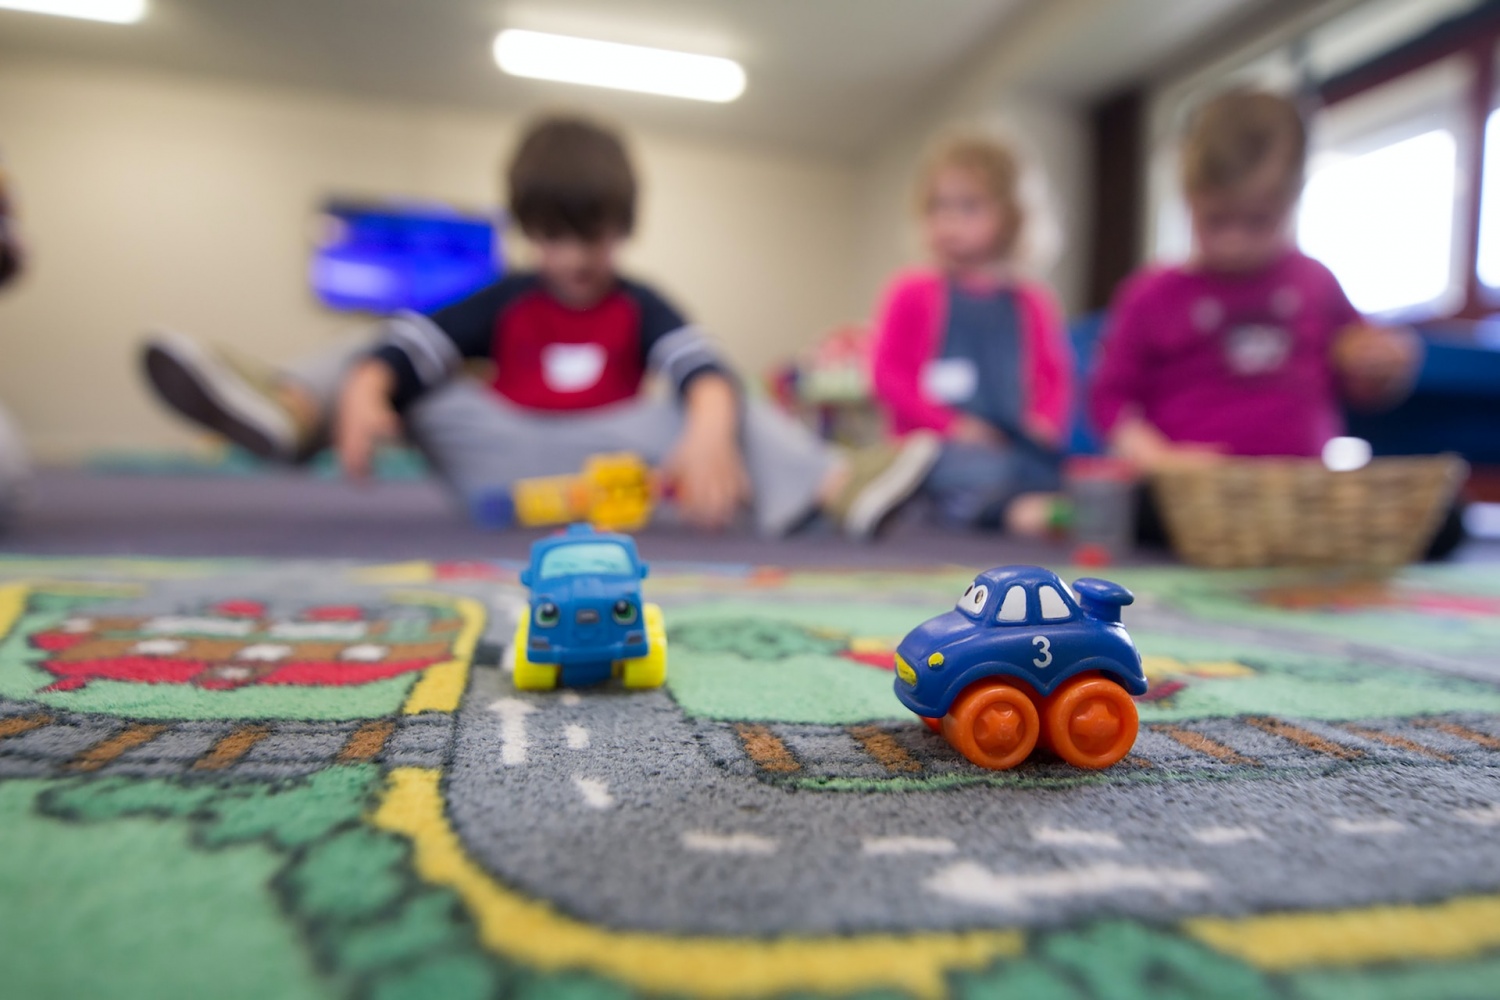 Study Finds Competent Robots Preferred by Preschoolers Over Incompetent Humans